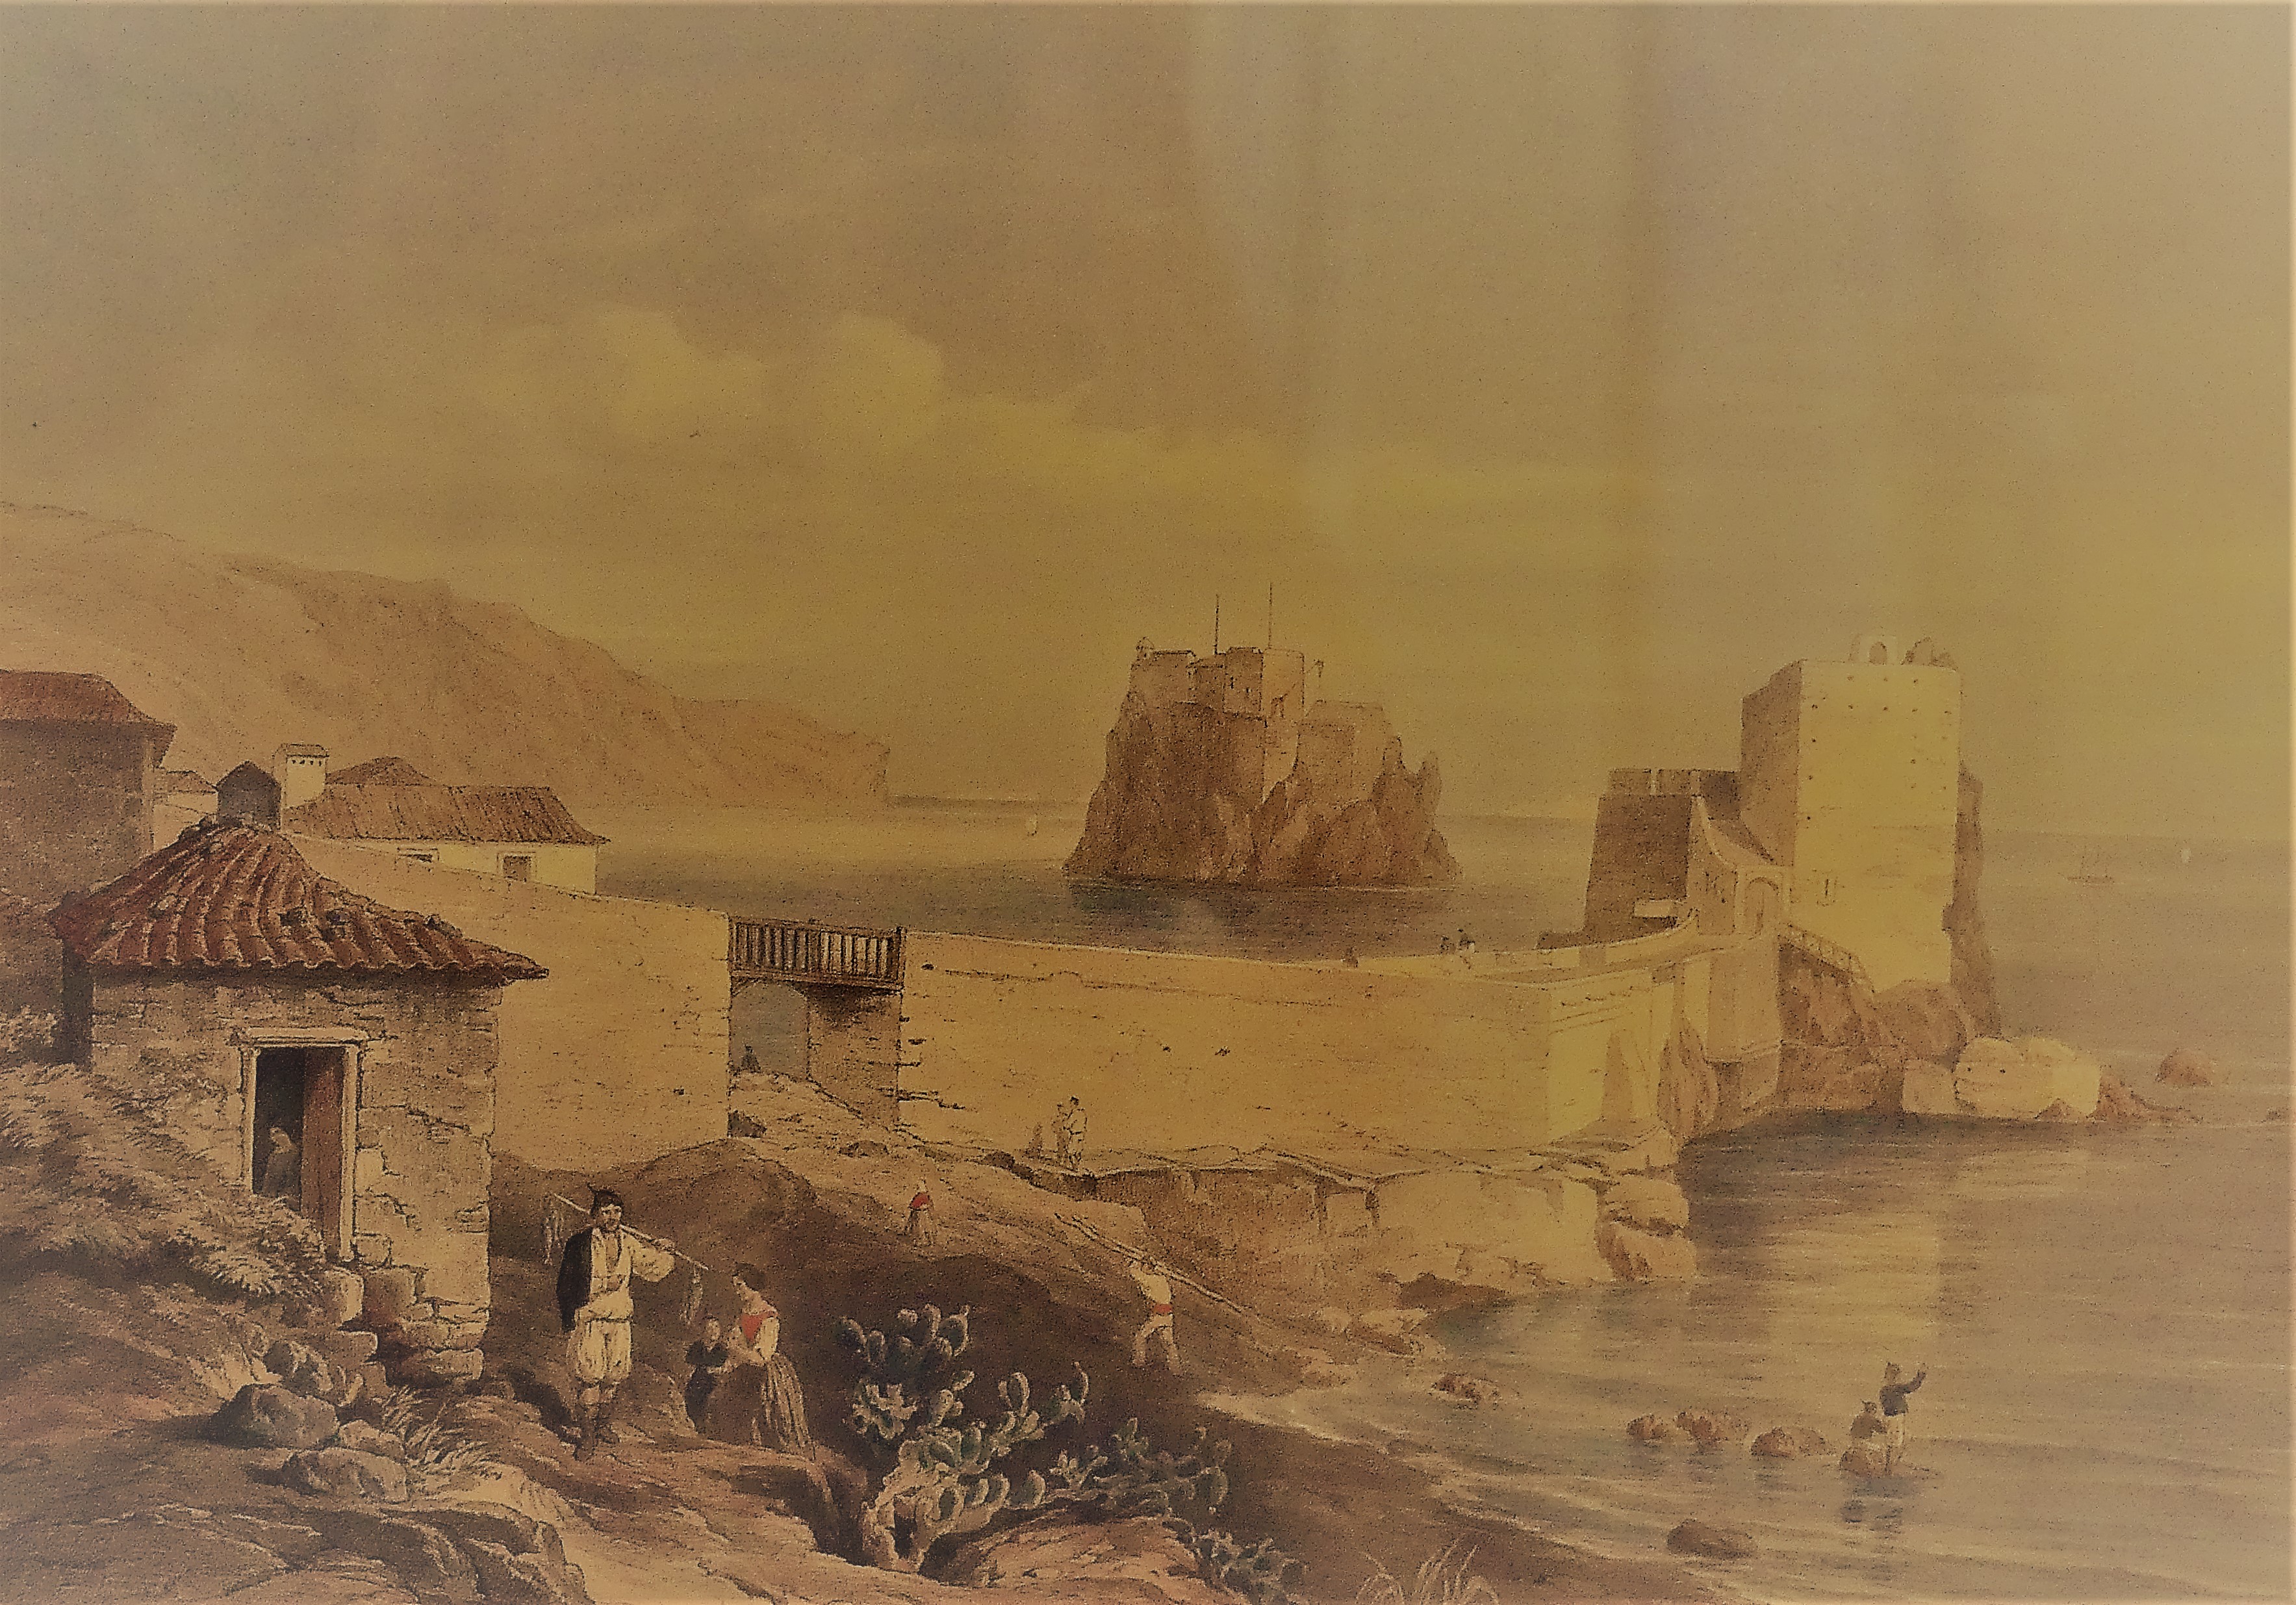 Funchals breakwater forts in the early days